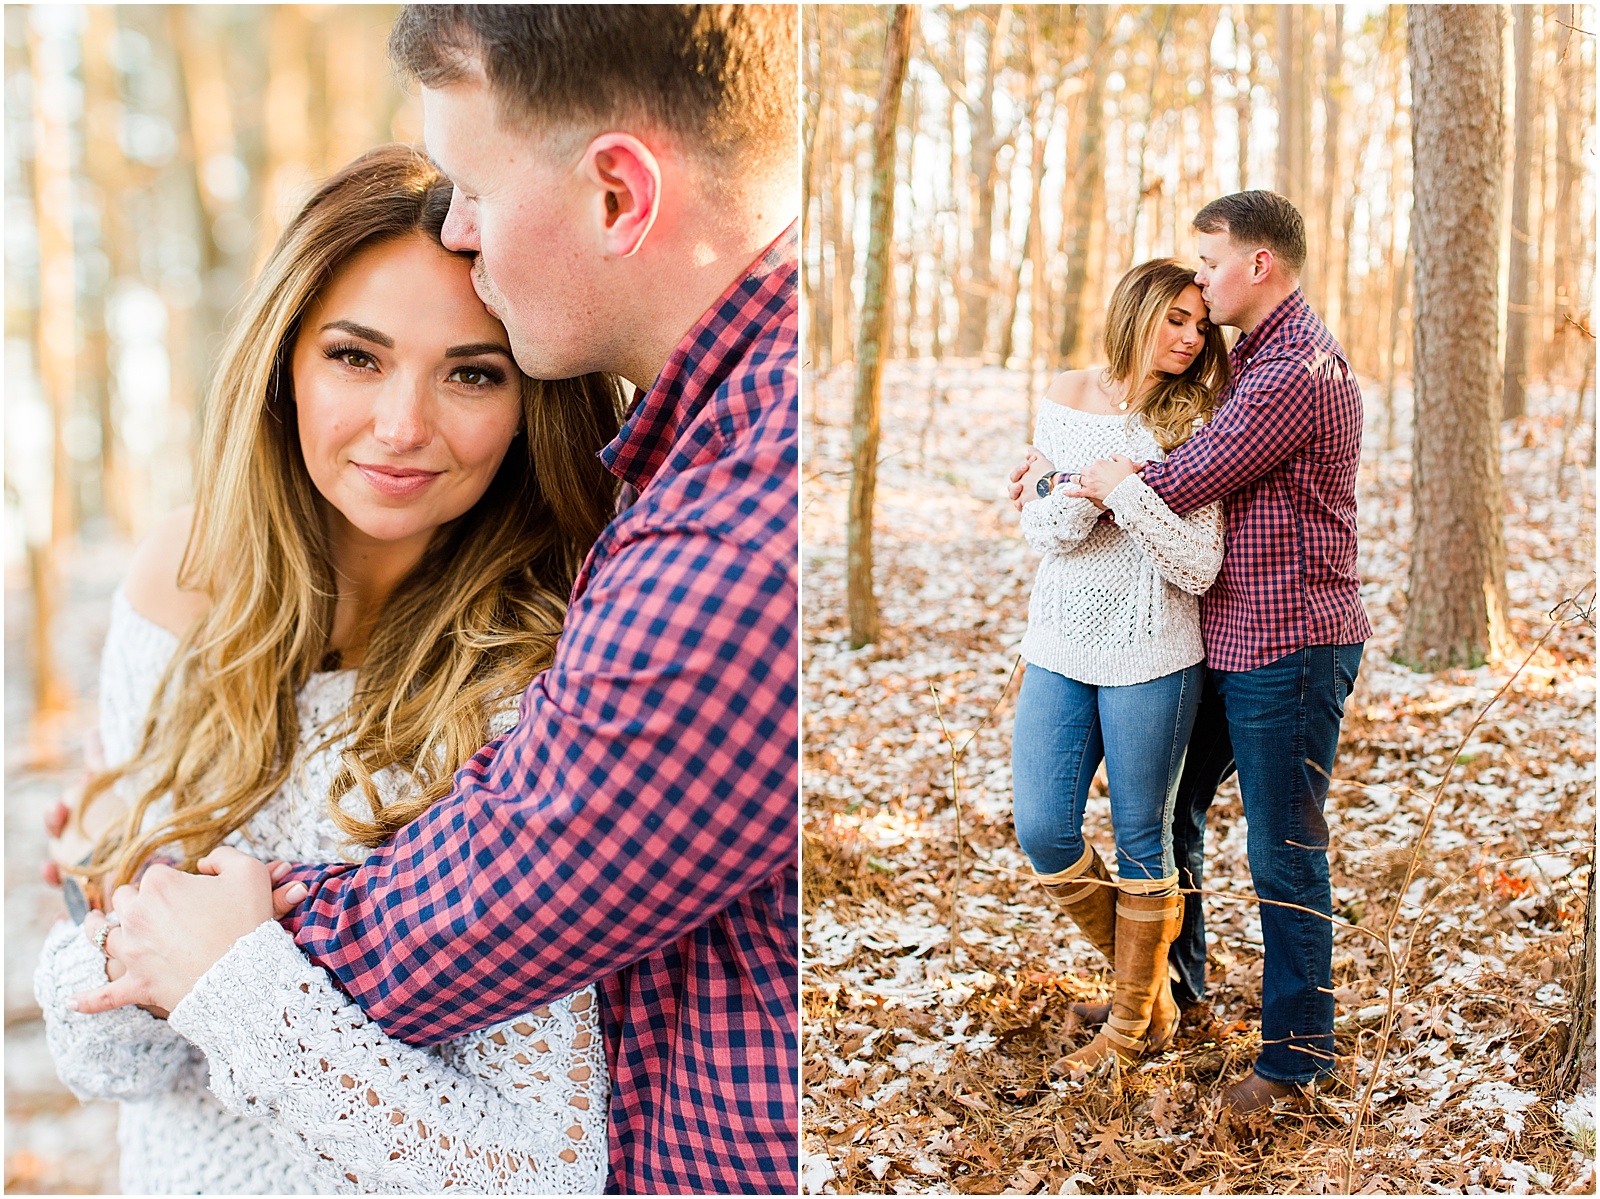 A Sunny Garden of the Gods Engagement Session | Shiloh and Lee | Bret and Brandie Photography038.jpg